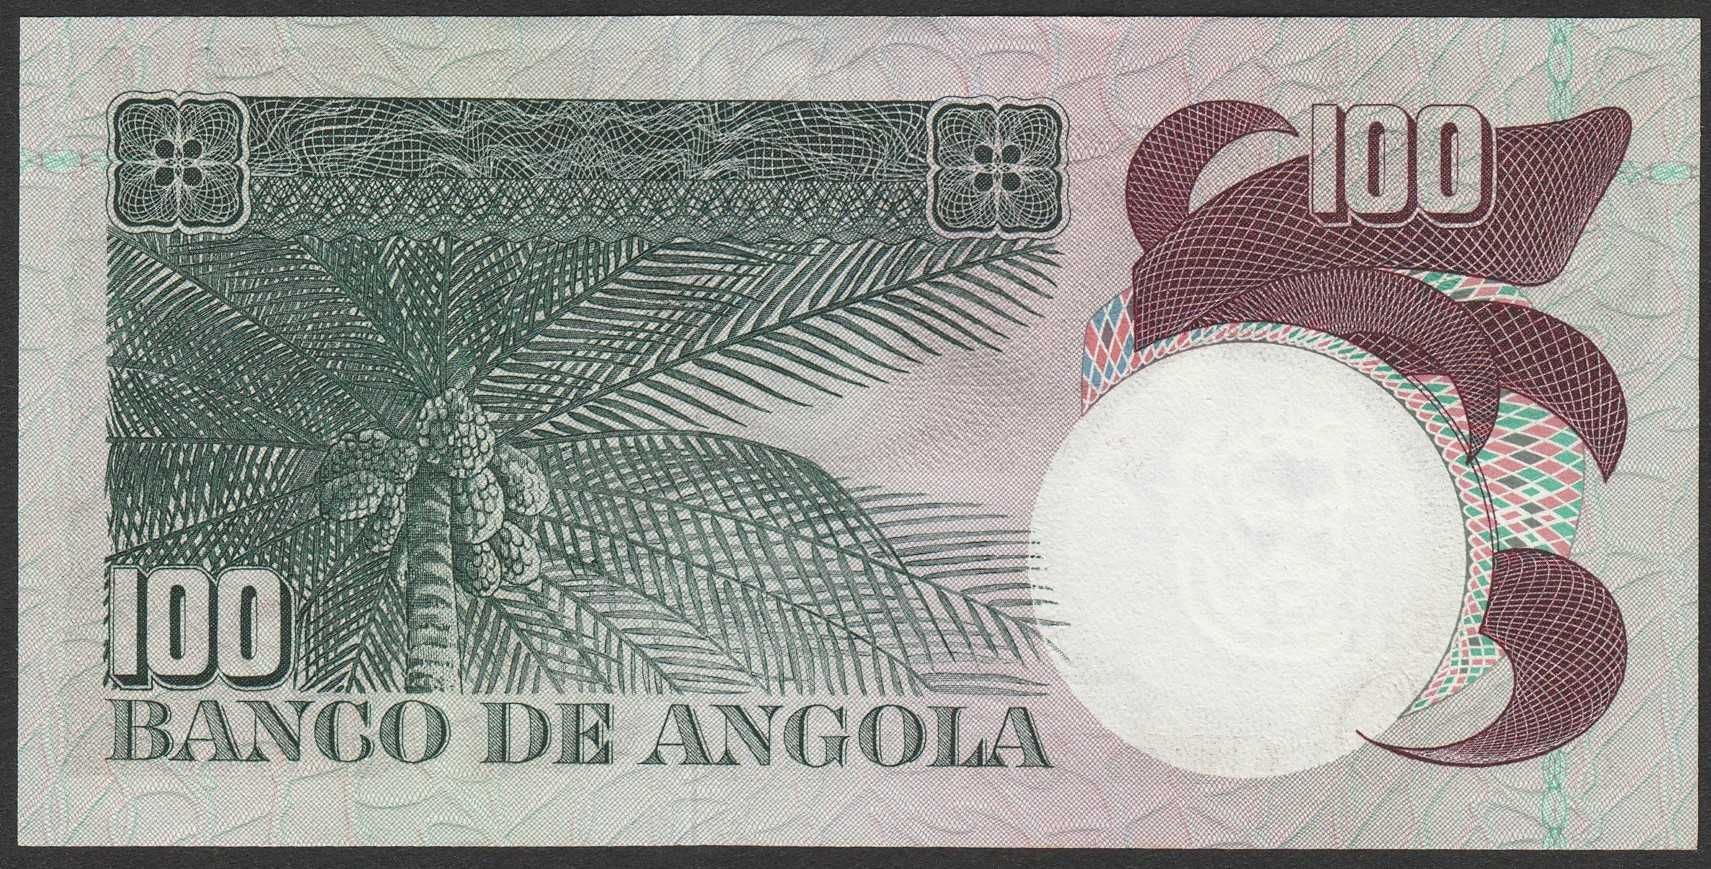 Angola 100 escudos 1973 - Camoes - stan bankowy UNC